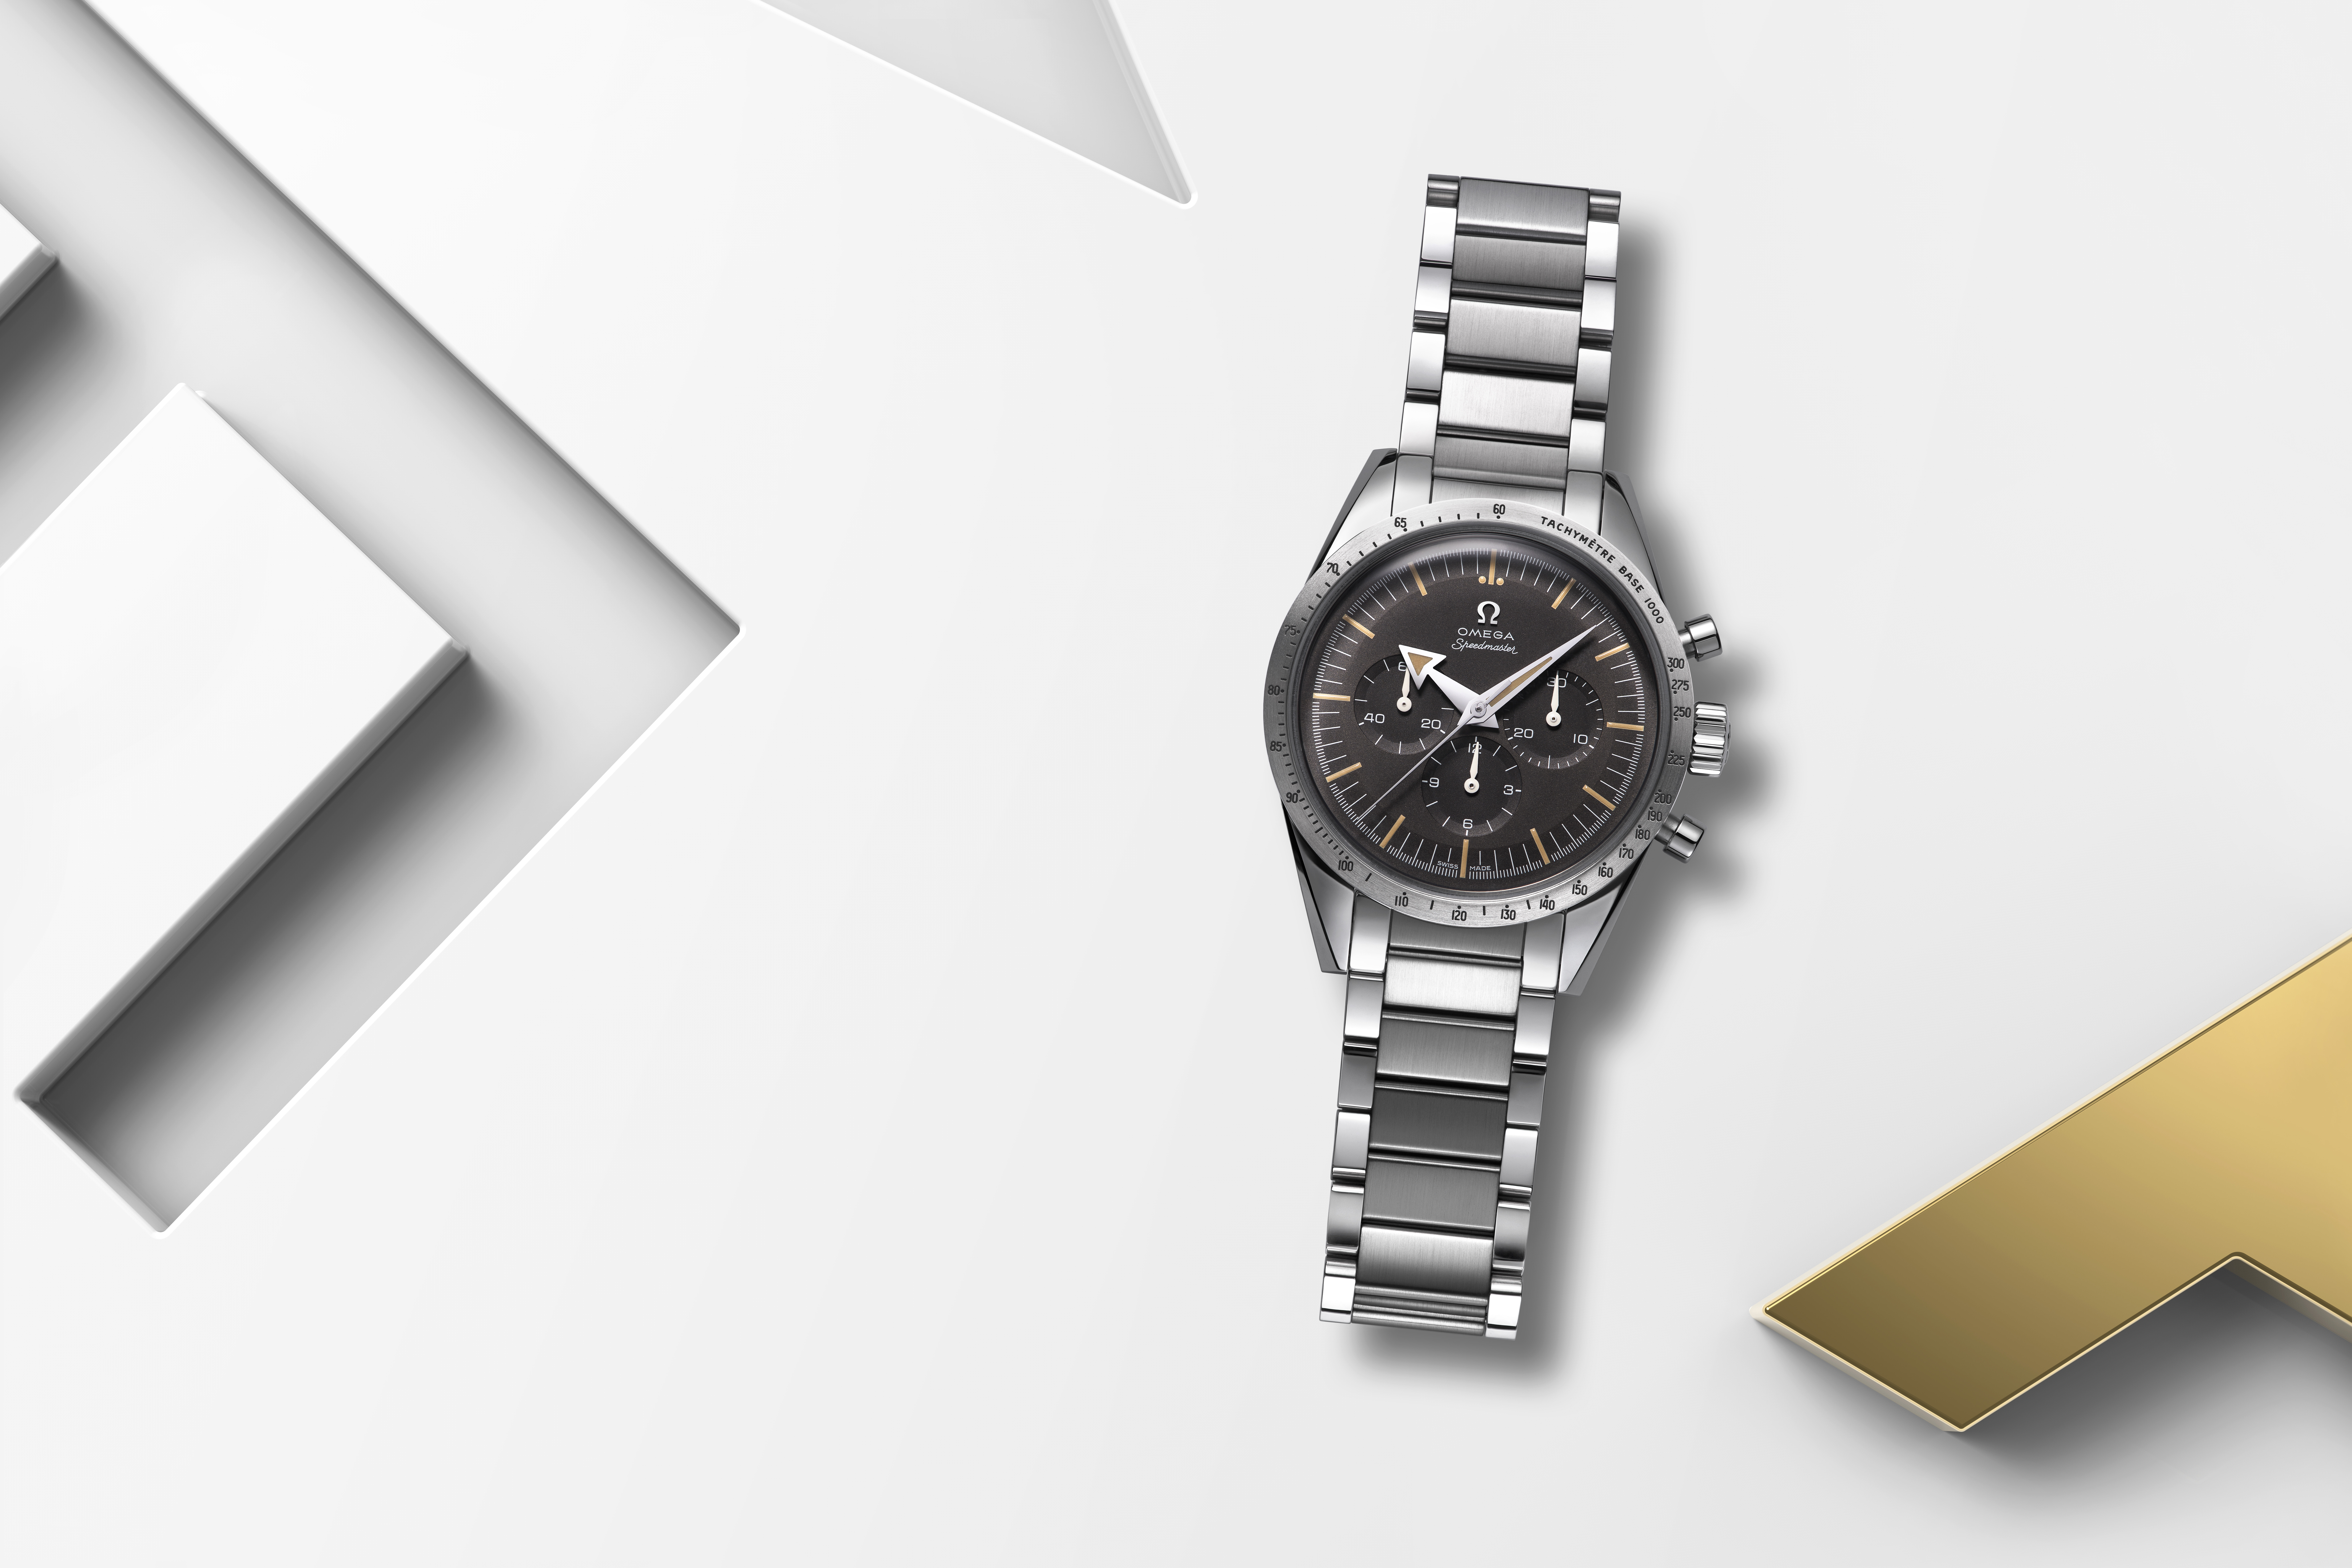 Introducing: The Omega Speedmaster 60th Anniversary Limited 